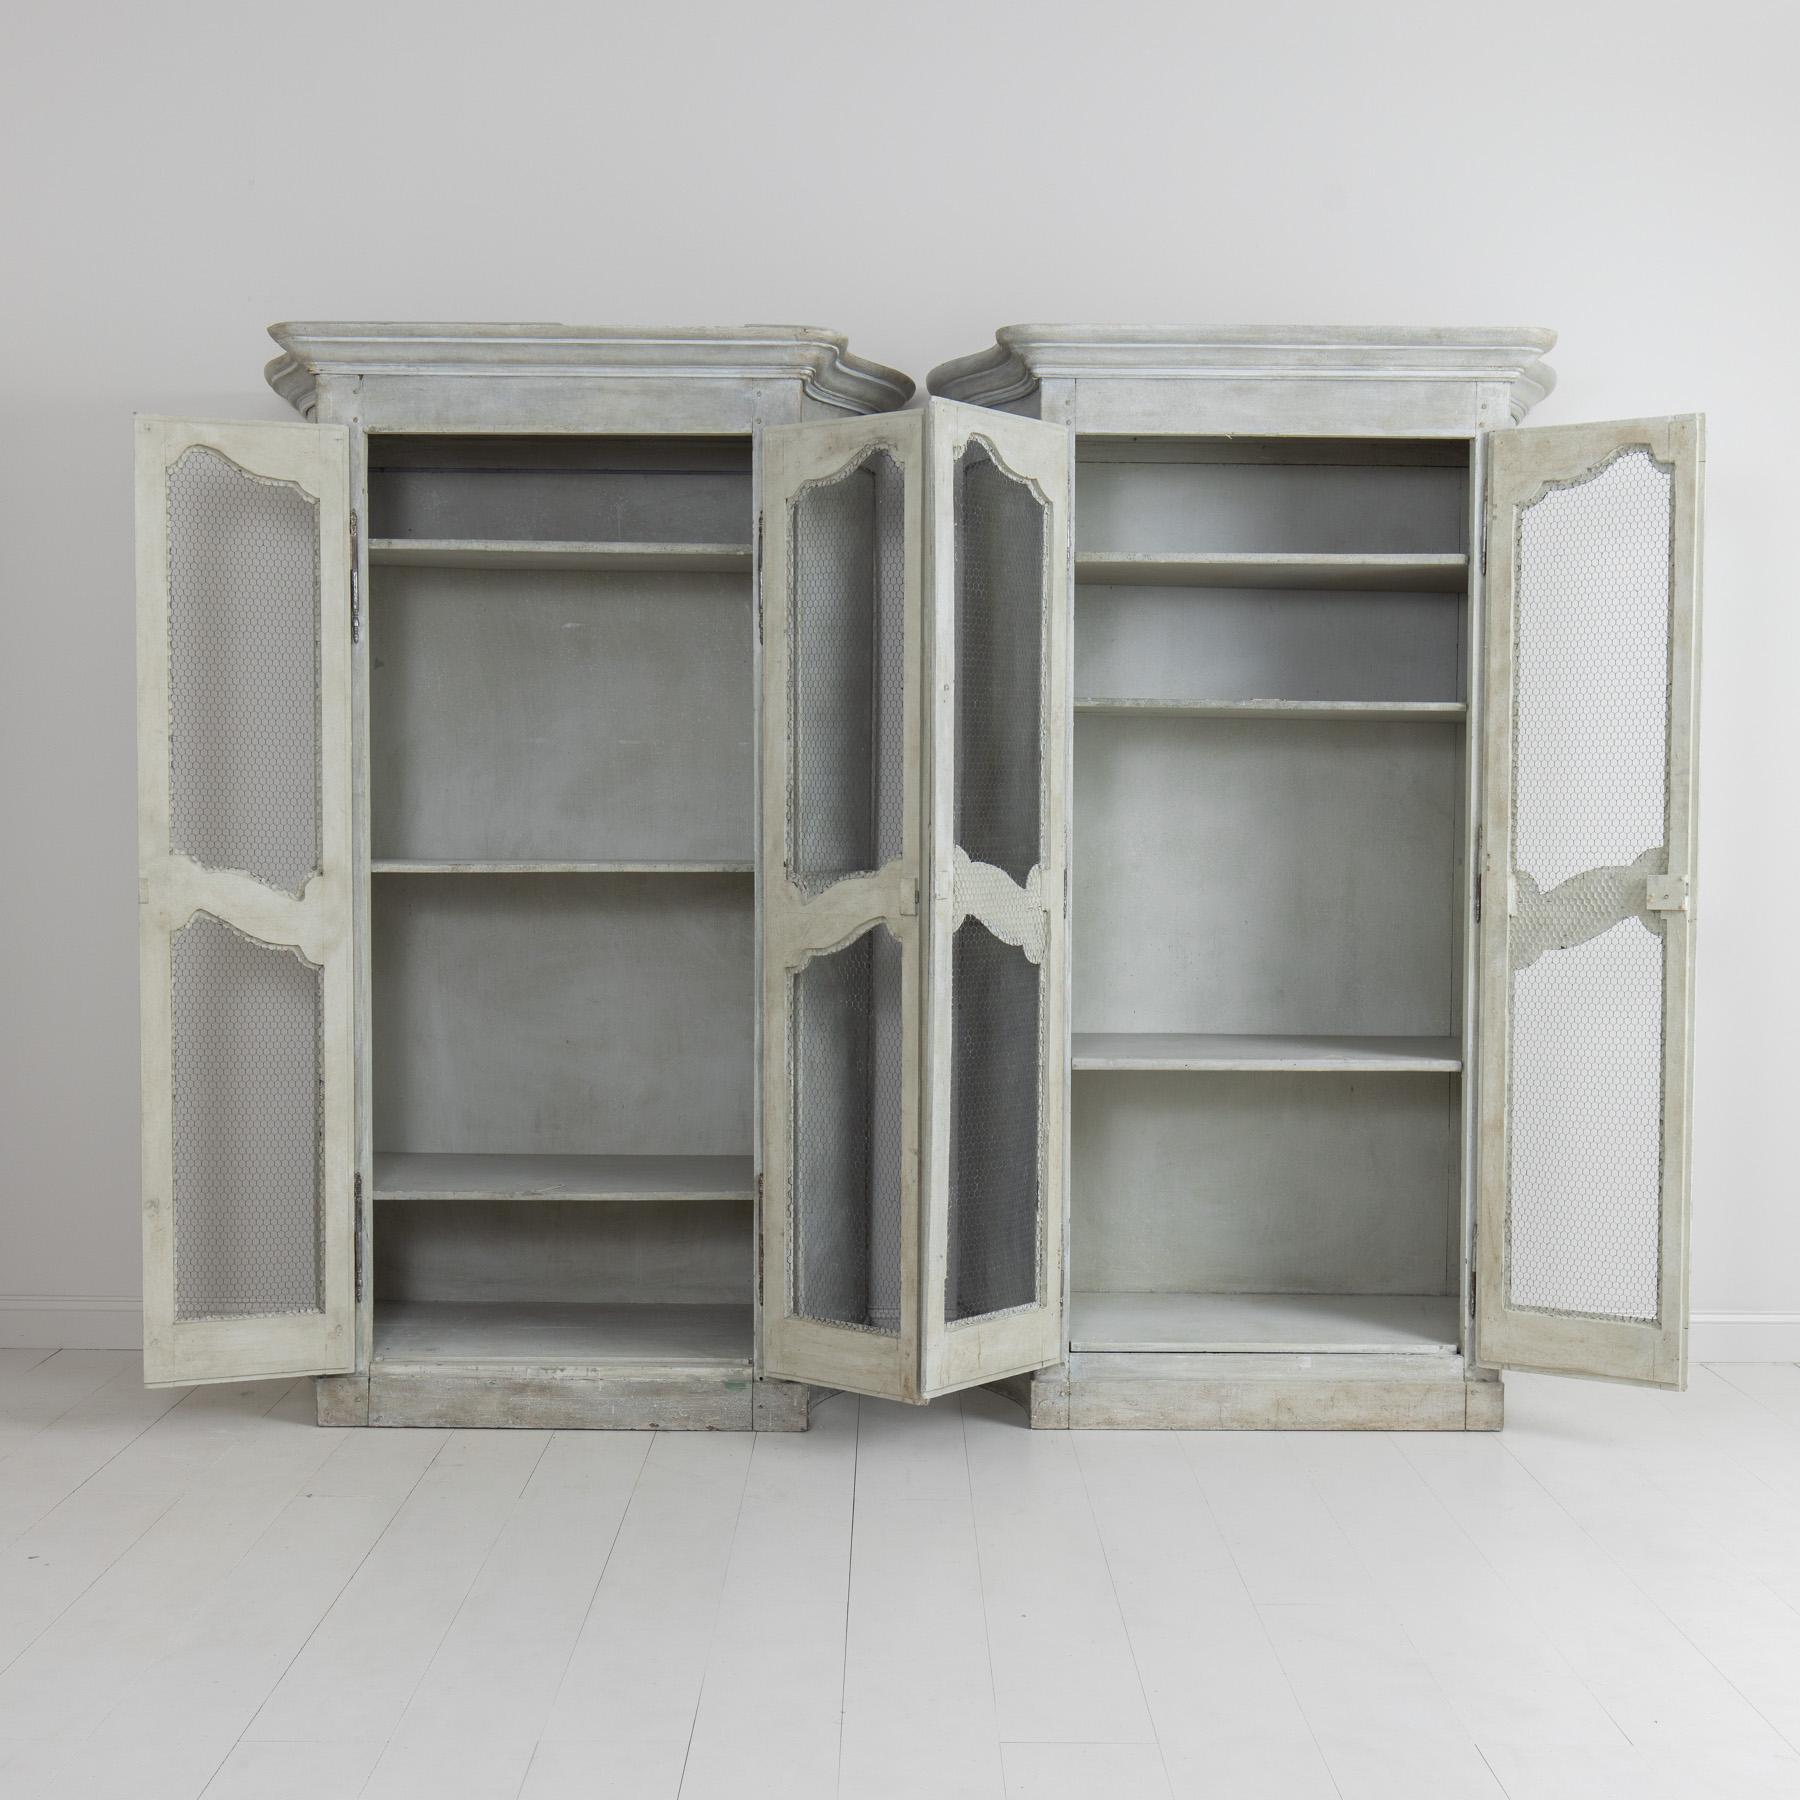 19th c. Pair of French Gray Painted Armoire Cabinets with Serpentine Sides For Sale 13